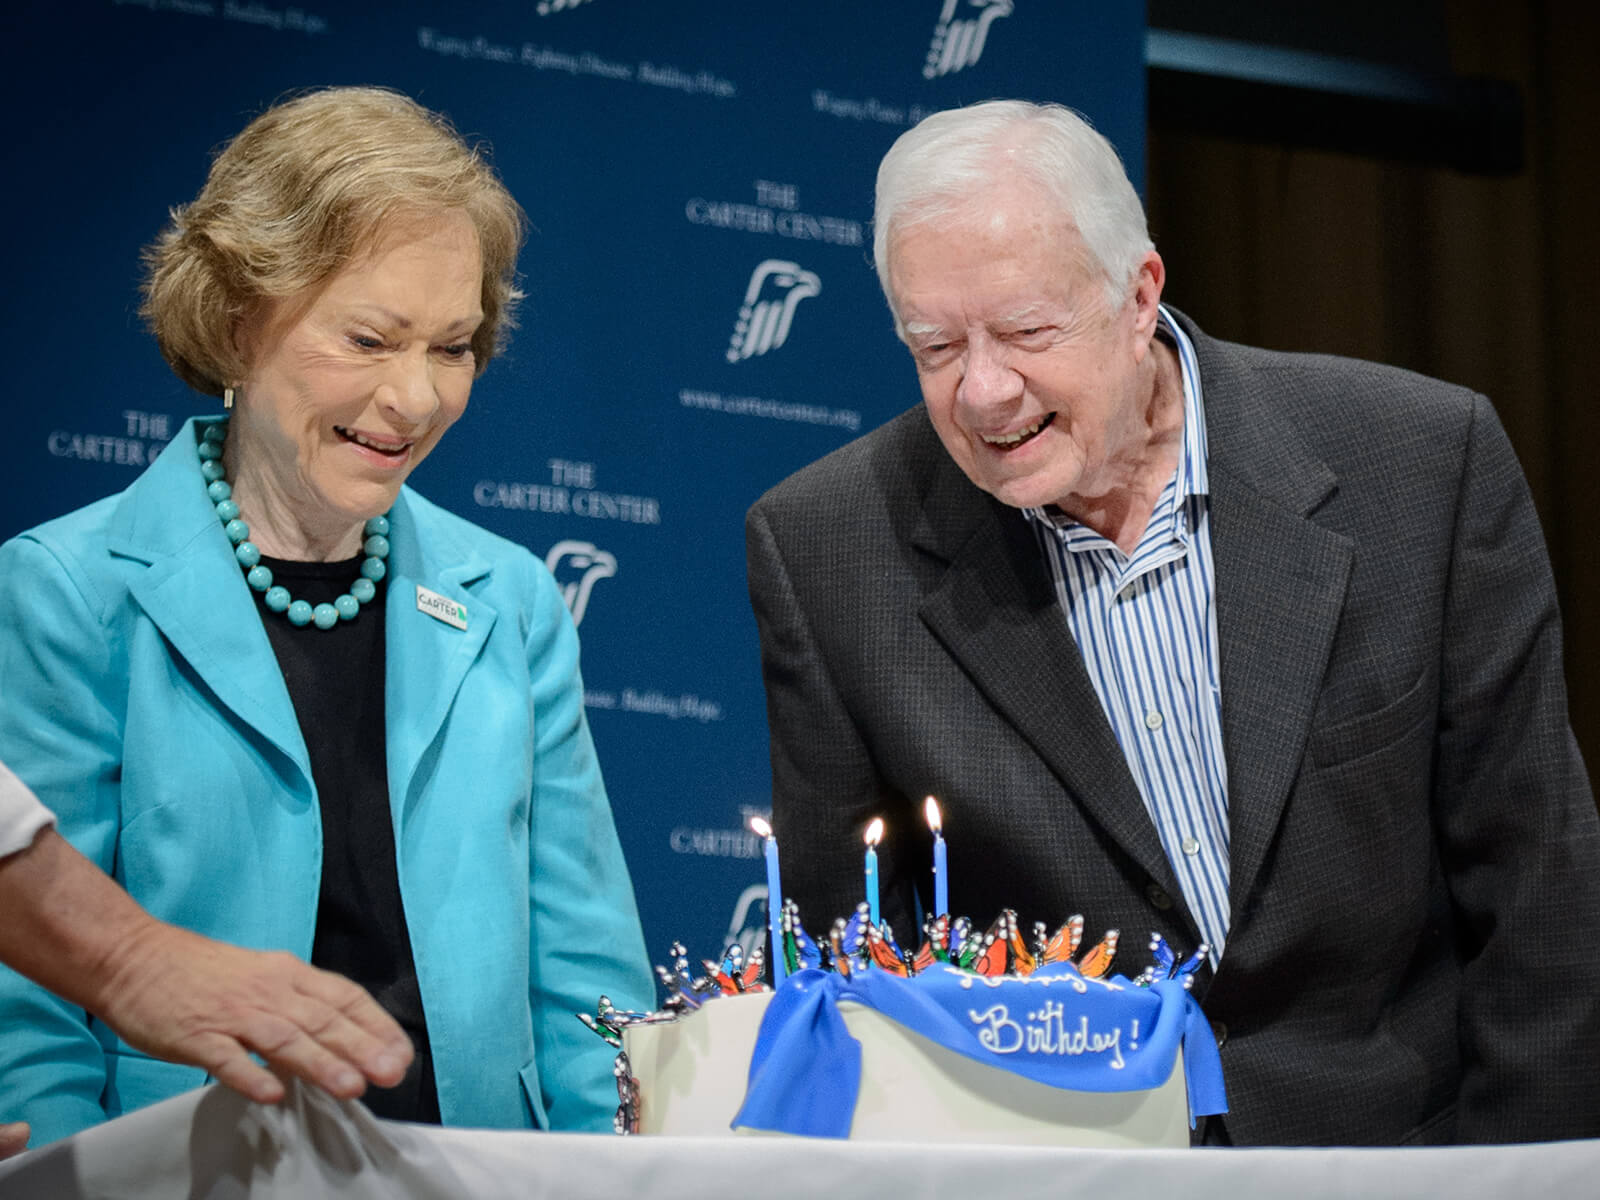 President Carter blows out candles.